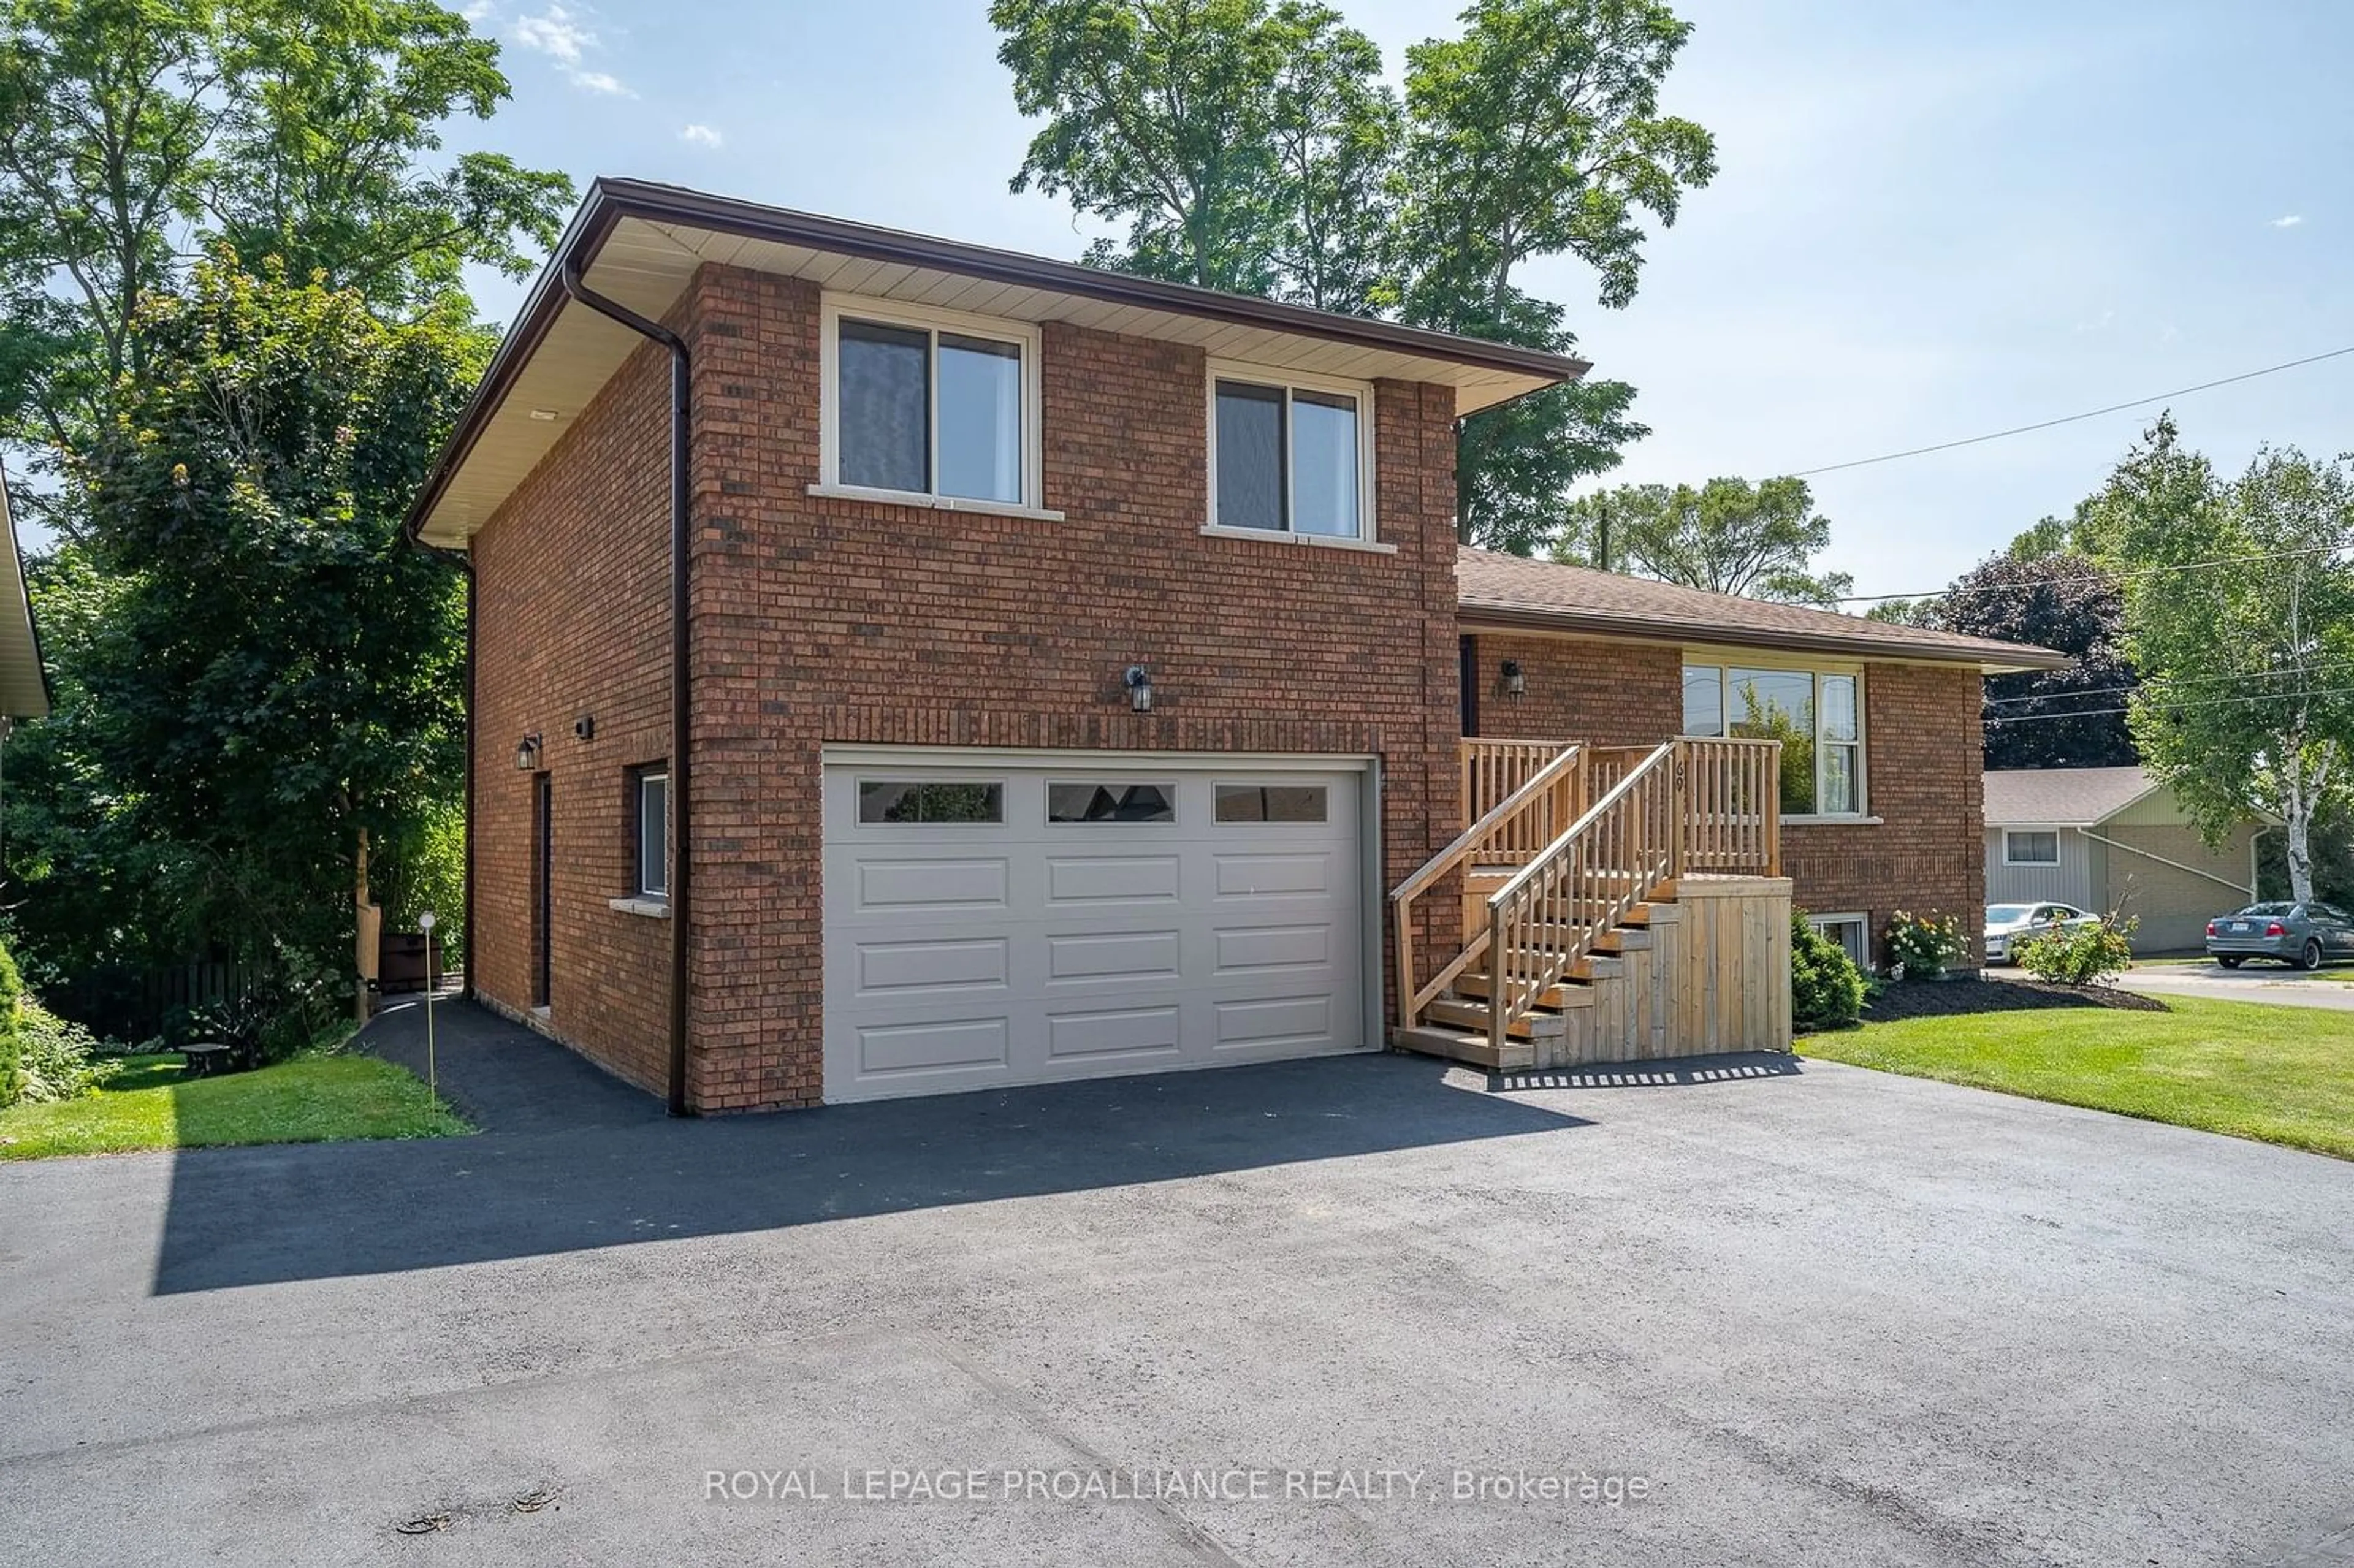 Home with brick exterior material for 69 Sanford St, Brighton Ontario L3Z 3H7